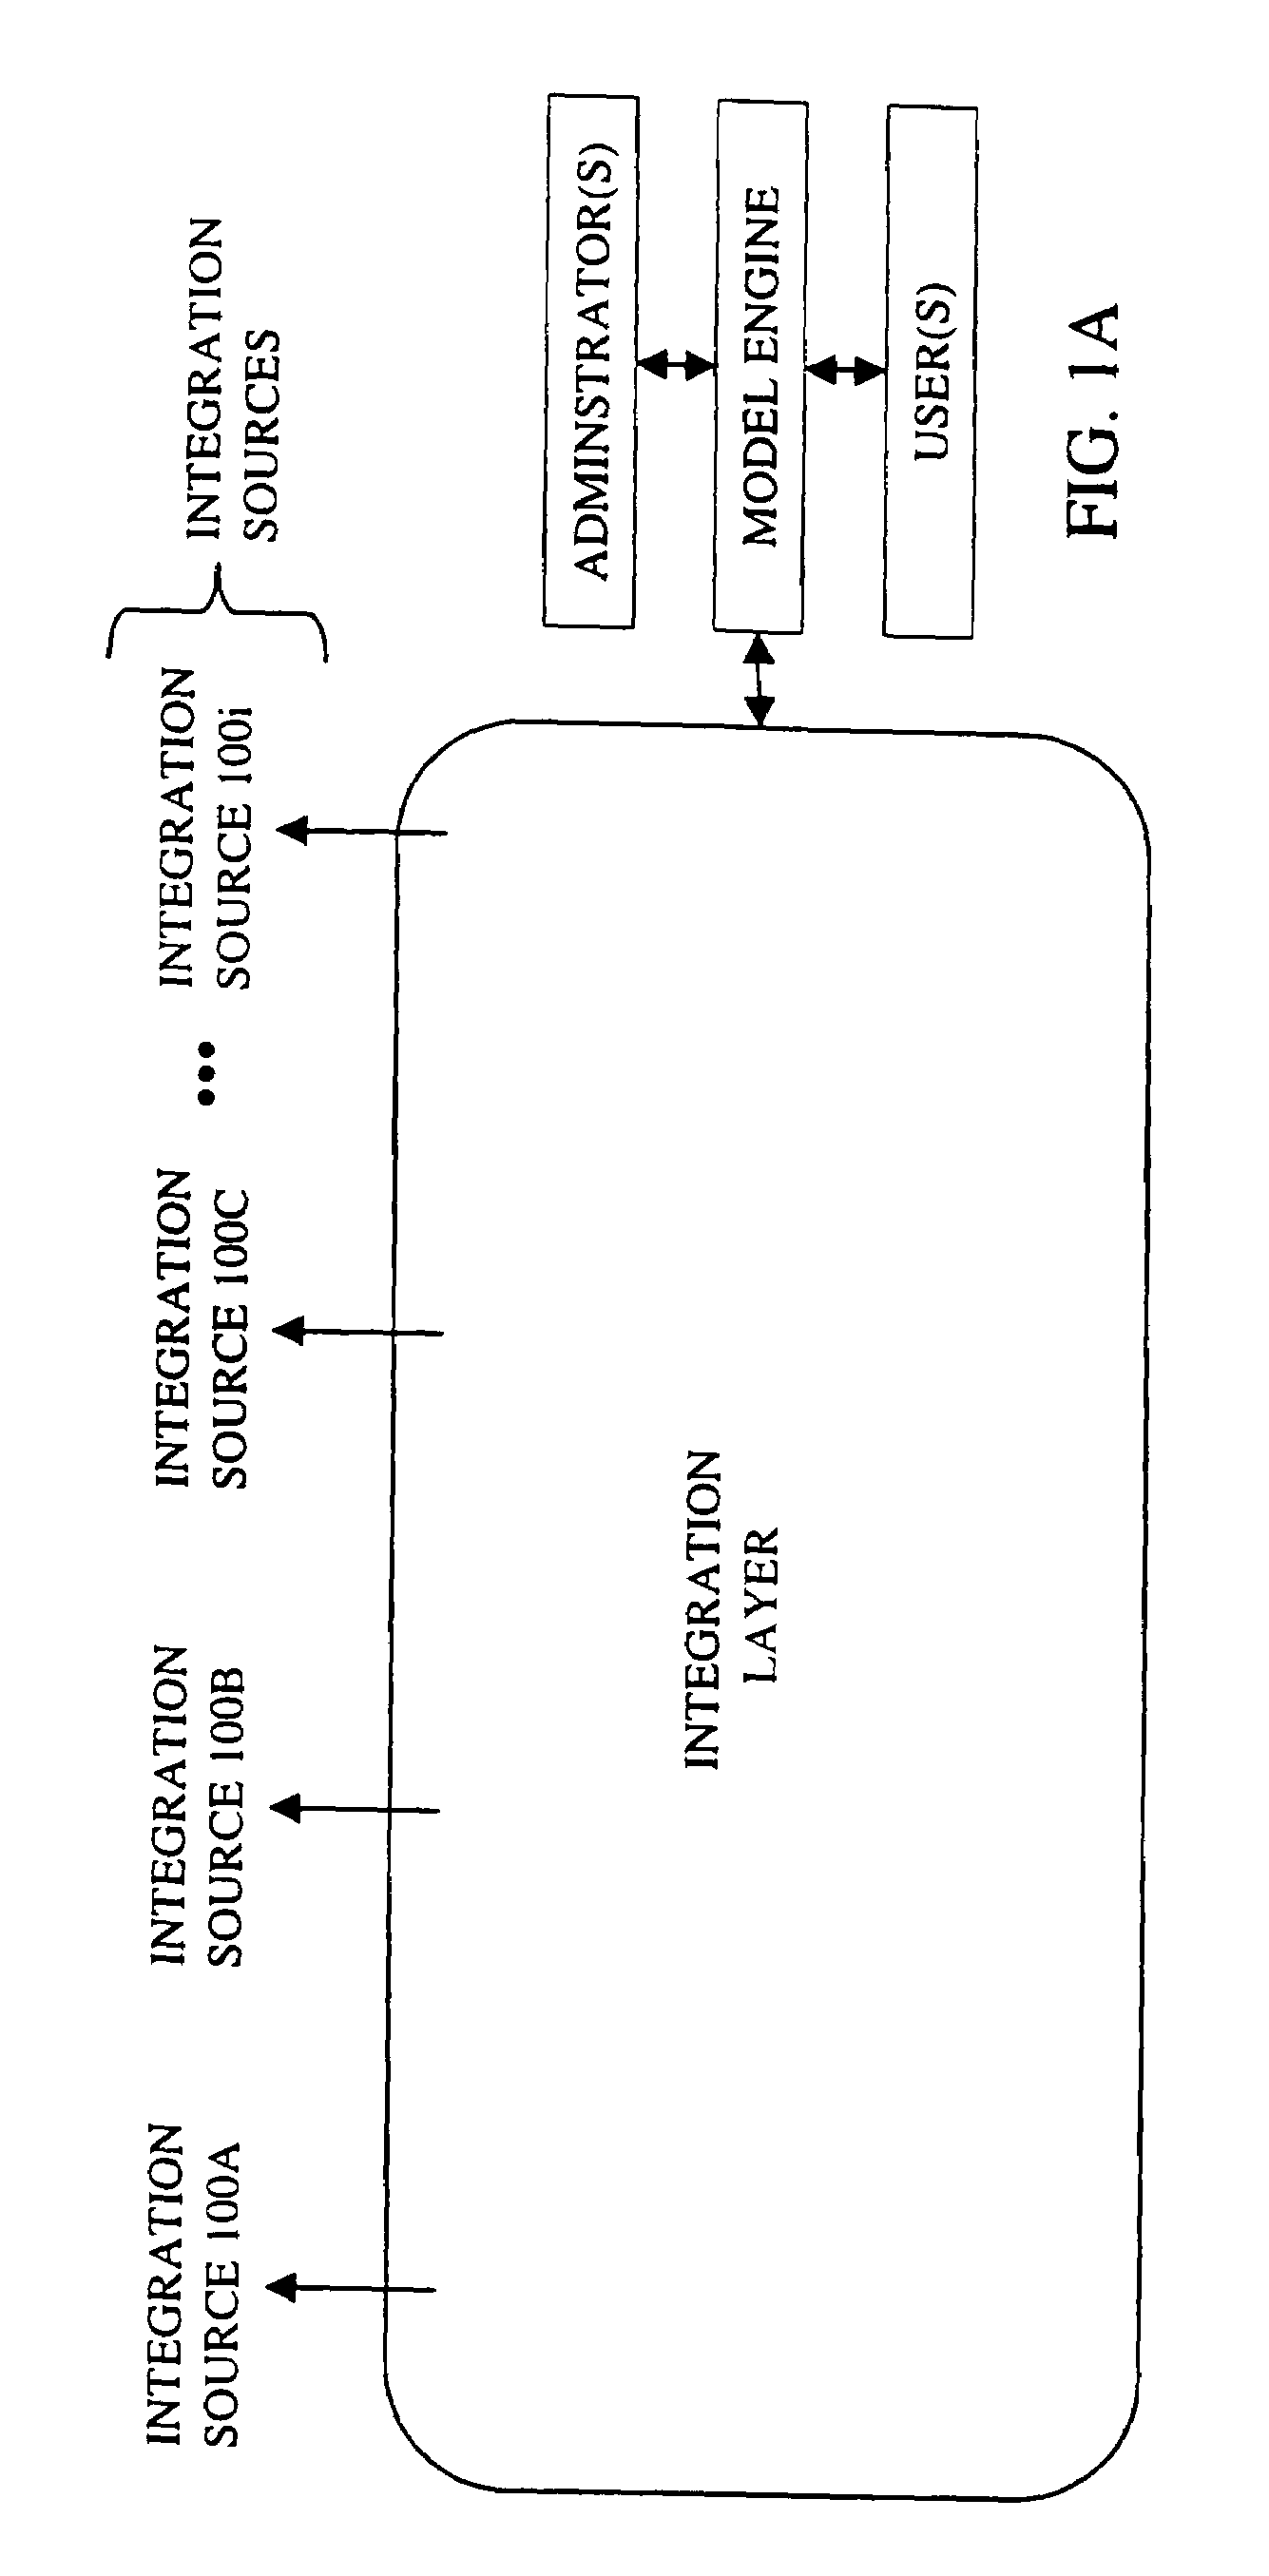 Method and apparatus for managing functions